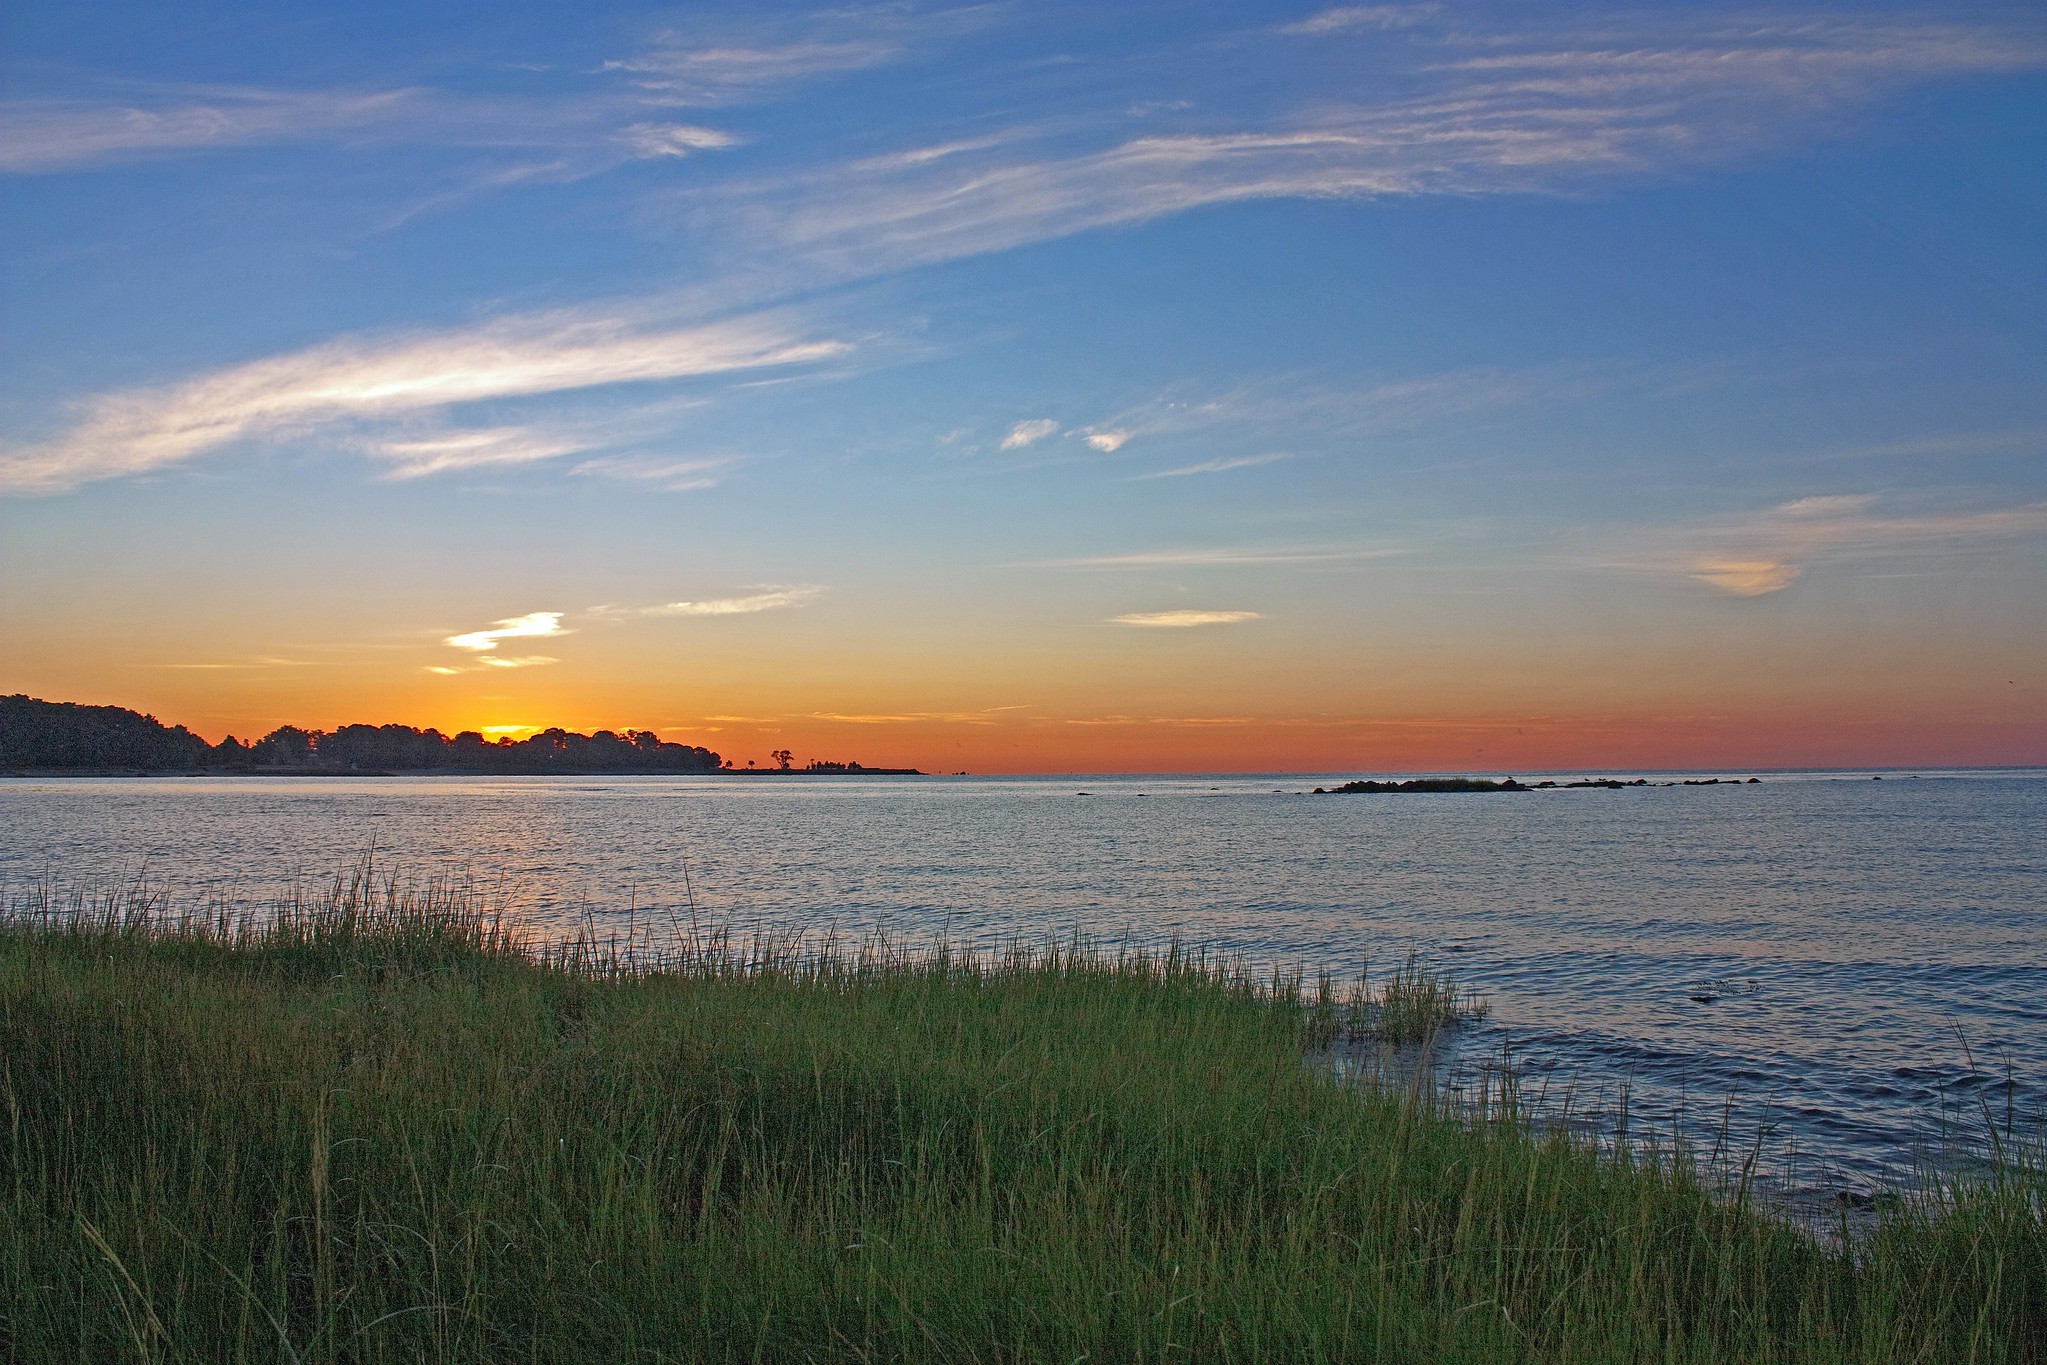 Sunrise over the grassy Westport Compo Beach in Connecticut, one of the best beaches on the East Coast